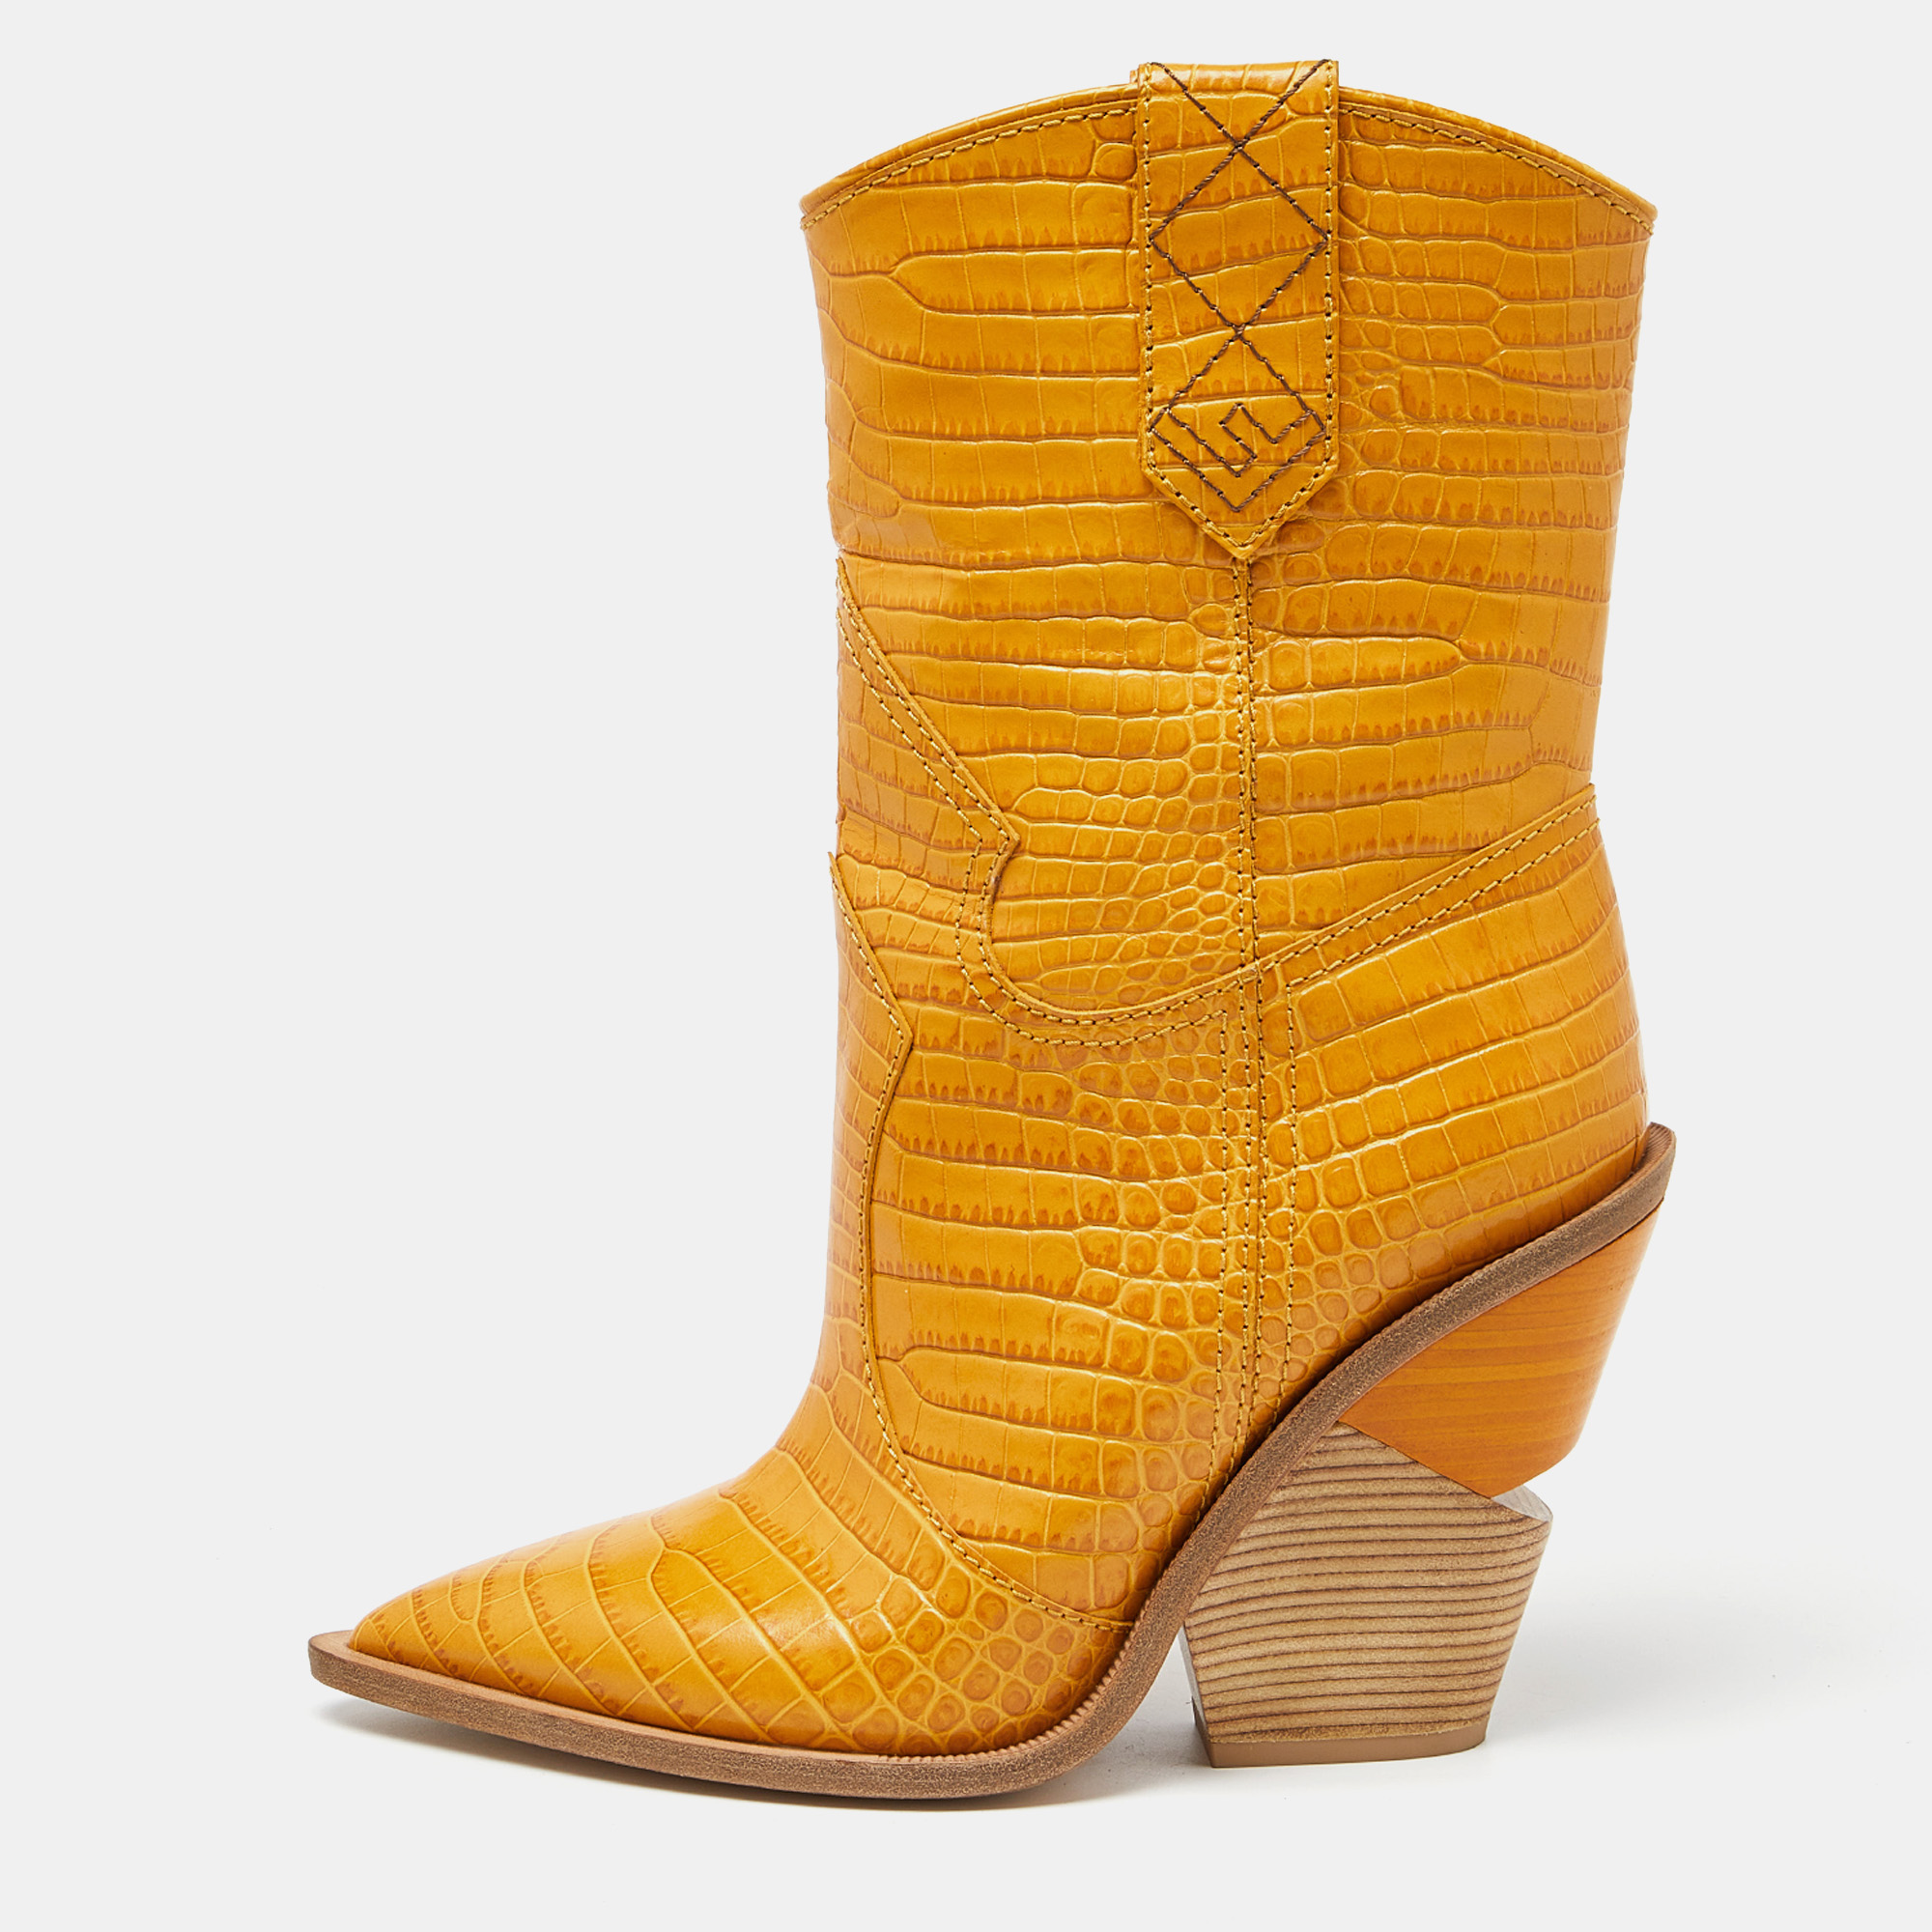 Fendi yellow croc embossed leather cowboy mid calf boots size 39